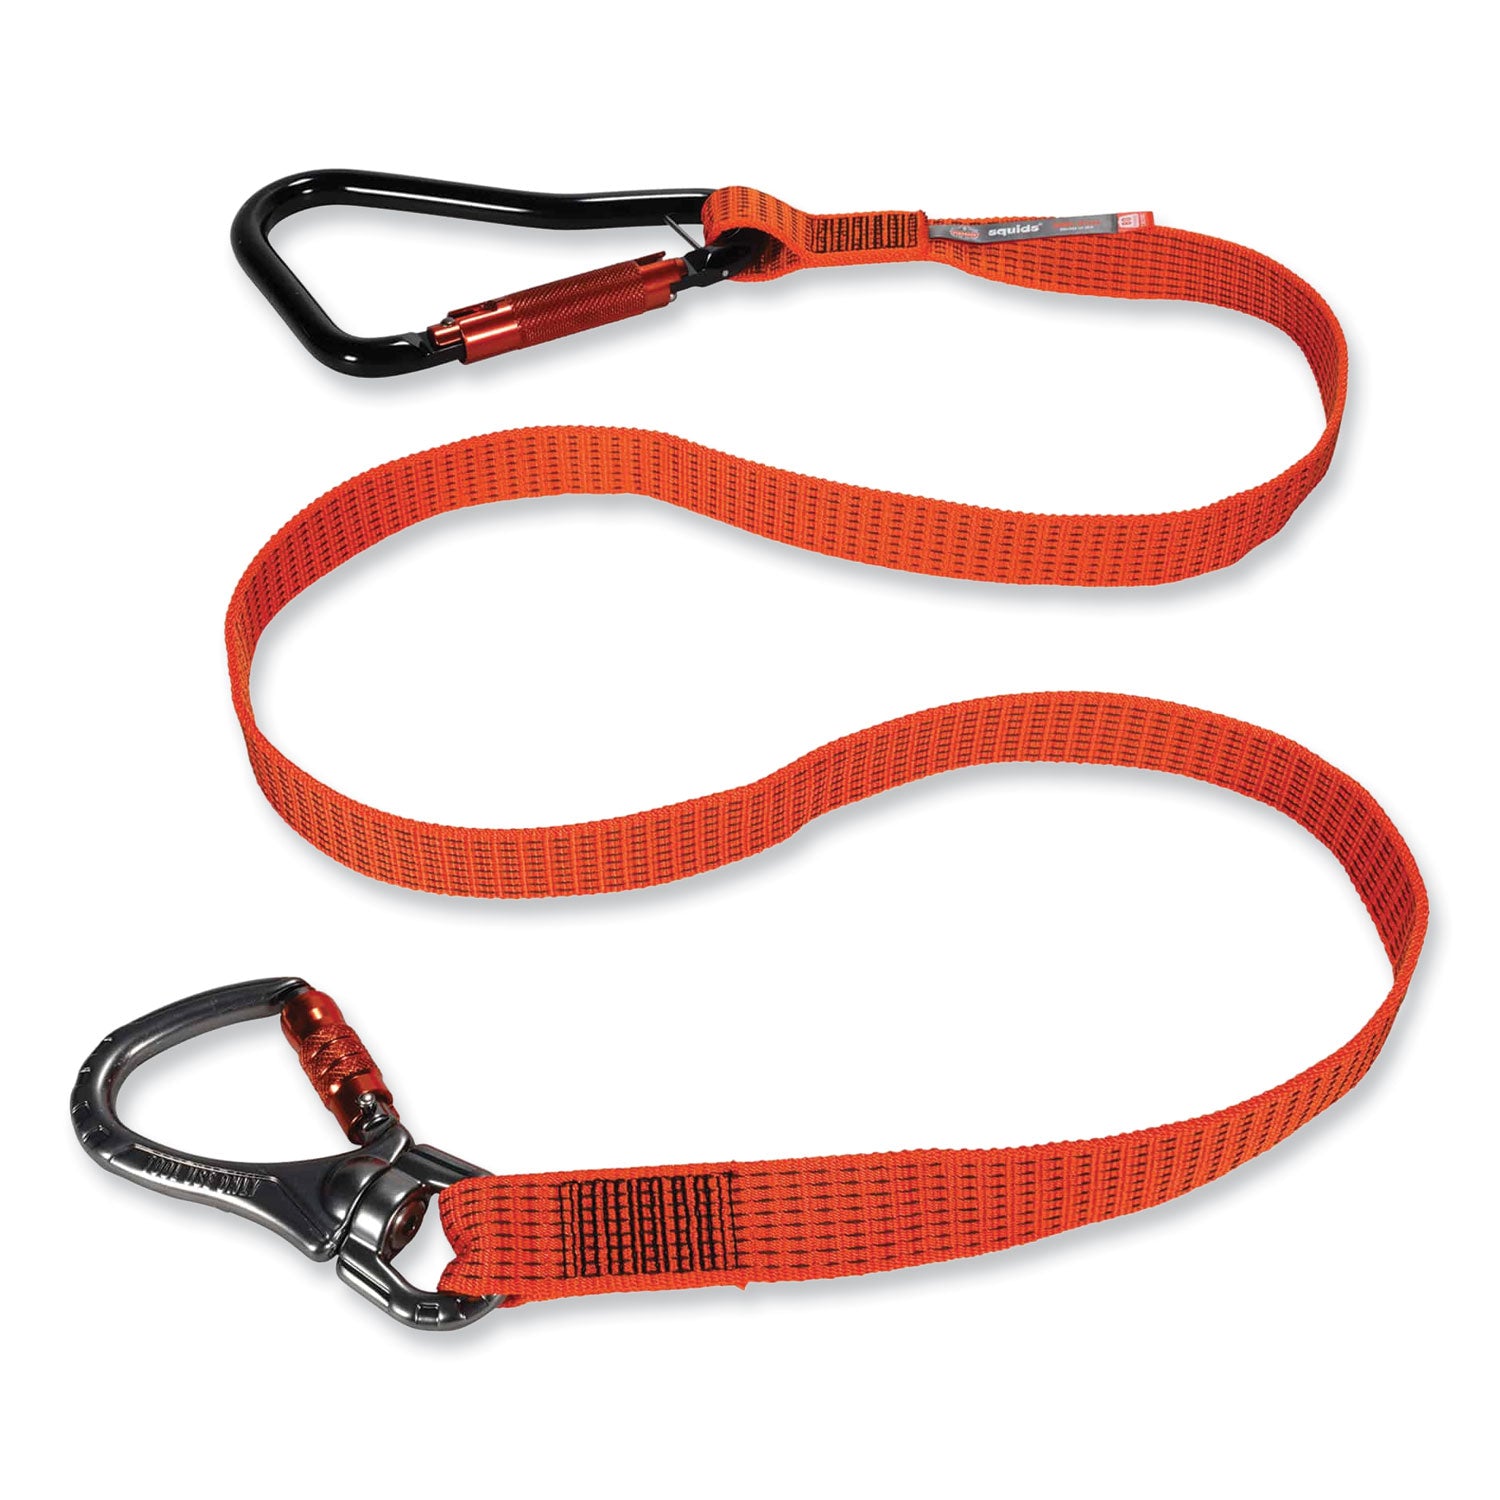 squids-3149-tool-lanyard-with-xl-+-swivel-carabiners-80-lb-max-work-capacity-76-orange-black-ships-in-1-3-business-days_ego19149 - 1